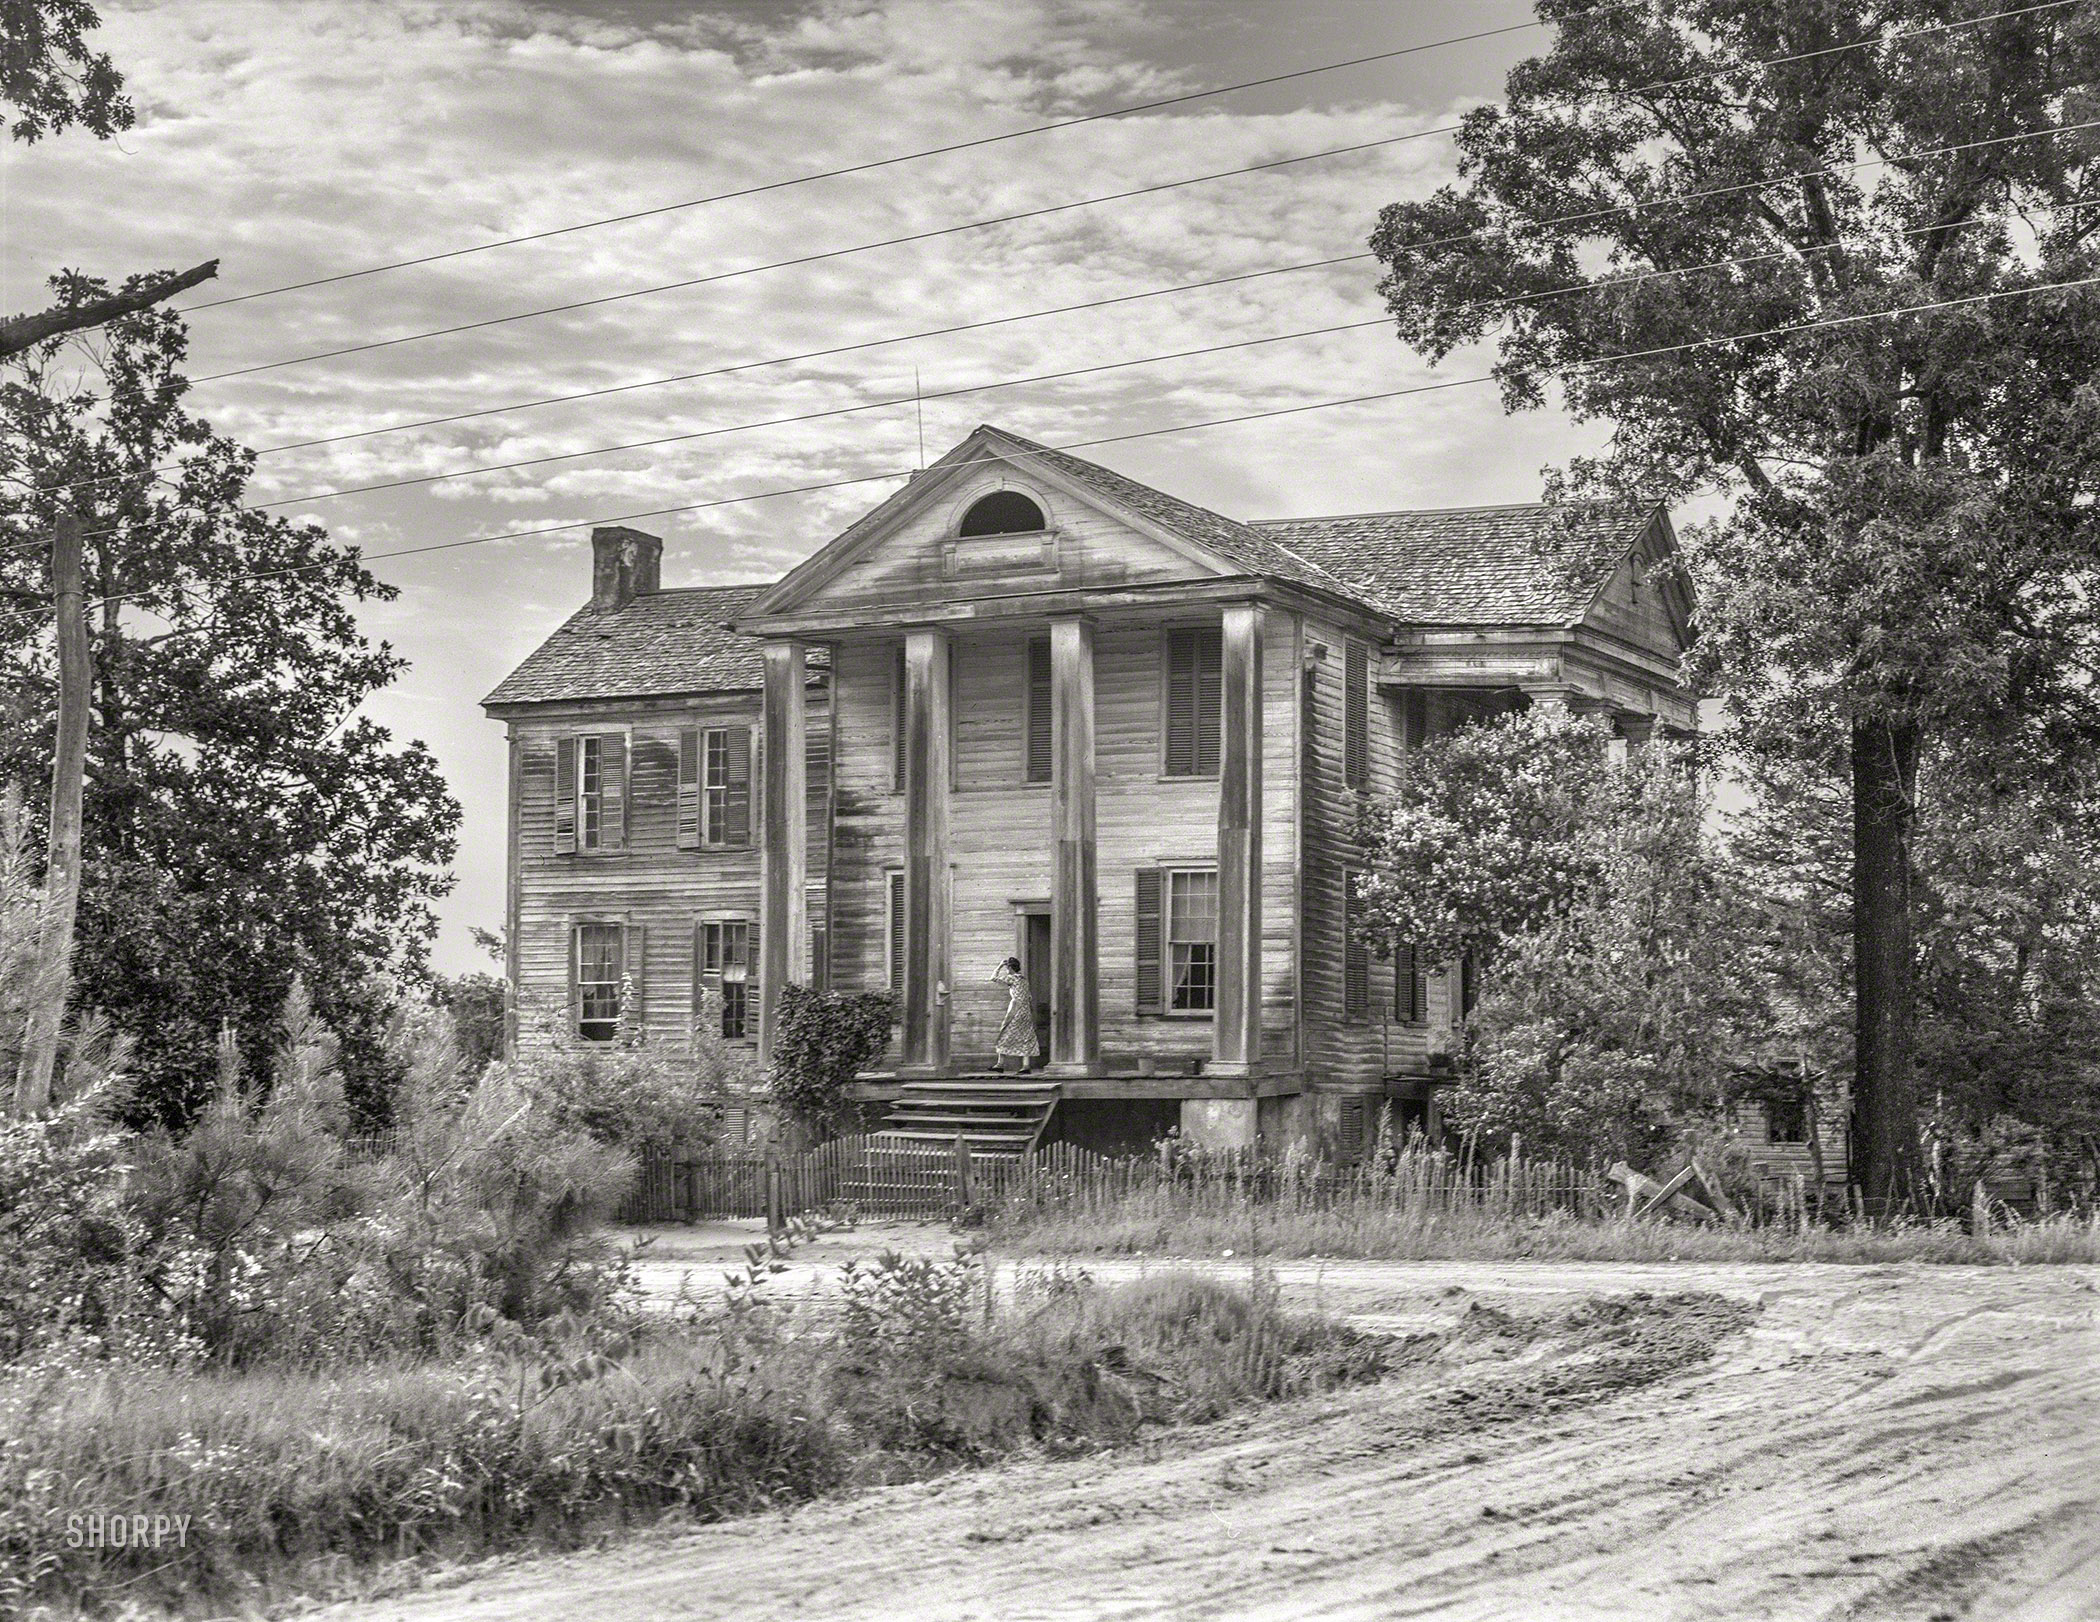 July 1937. "Antebellum plantation house in Greene County, Georgia." 4x5 acetate negative by Dorothea Lange, Farm Security Administration. View full size.